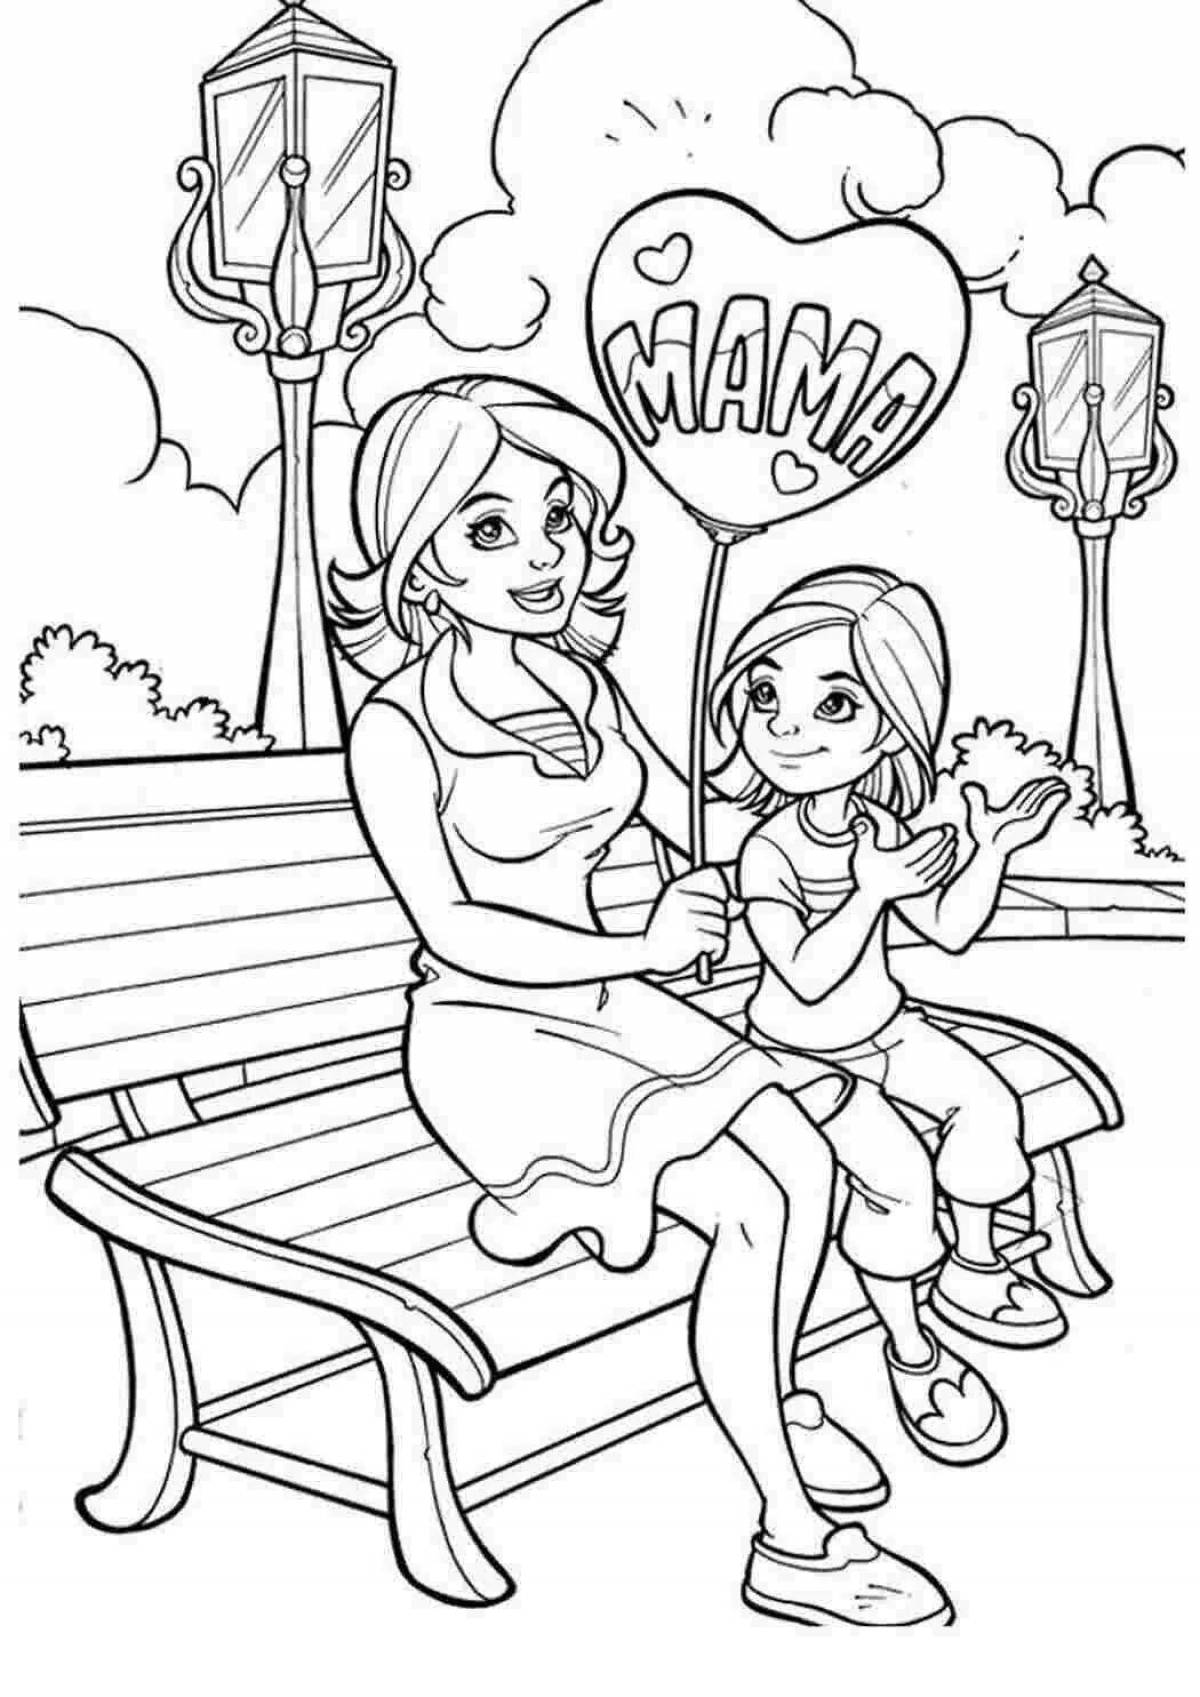 Magic birthday coloring book for mom from daughter